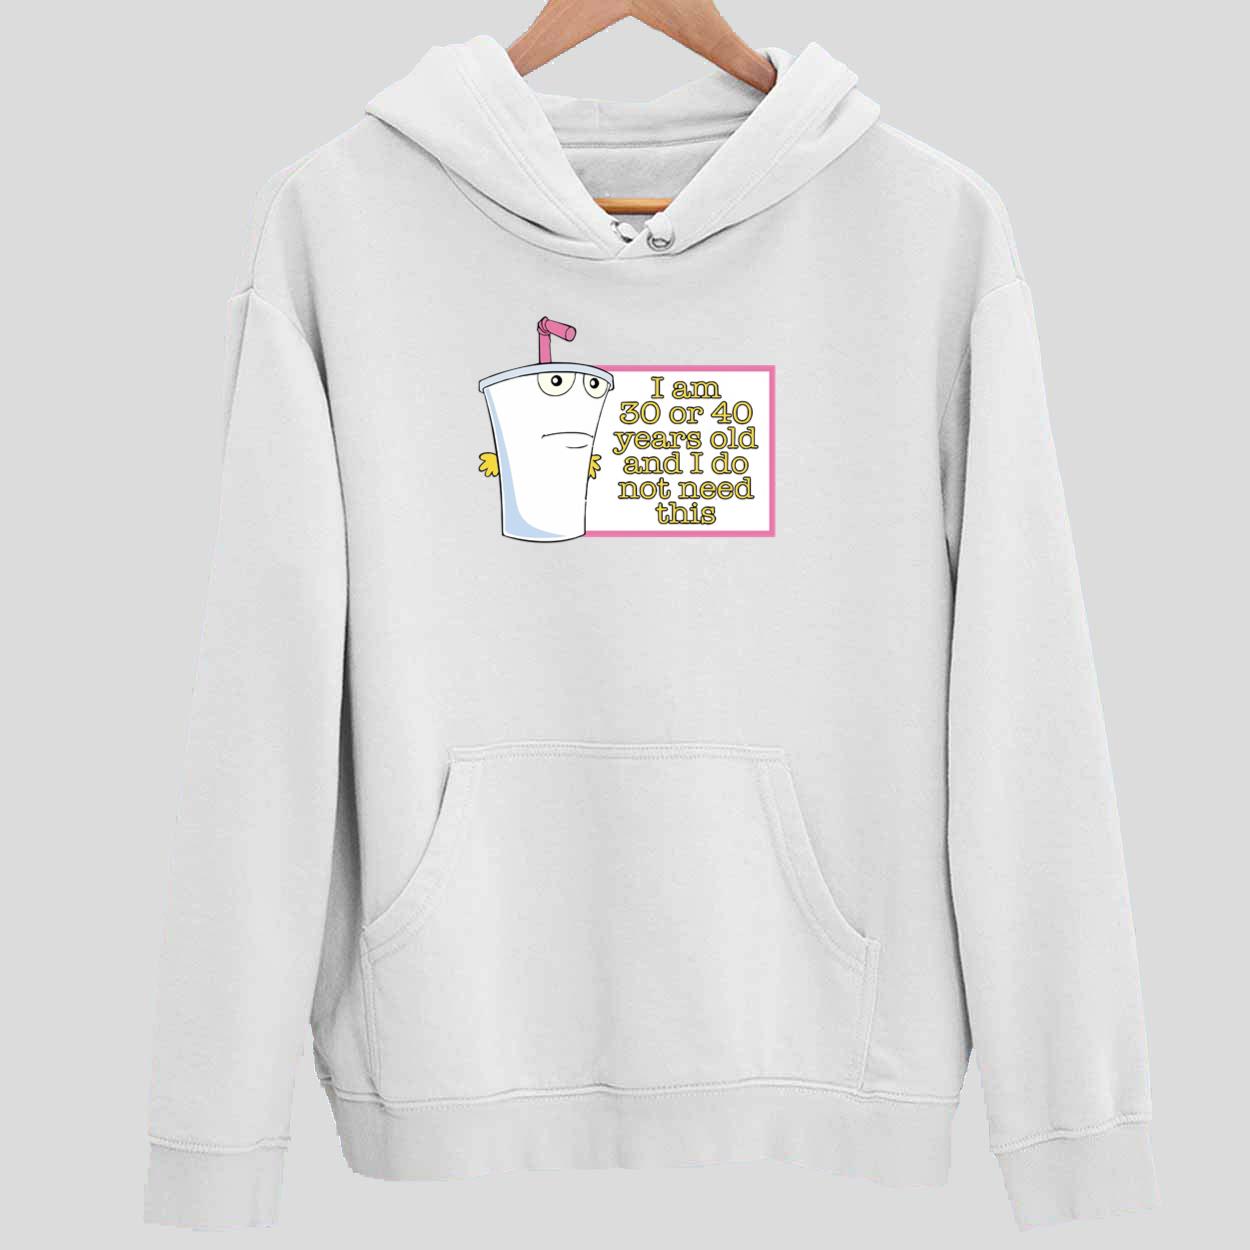 Master Shake I Am 30 Or 40 Years Old And I Do Not Need This Shirt ...